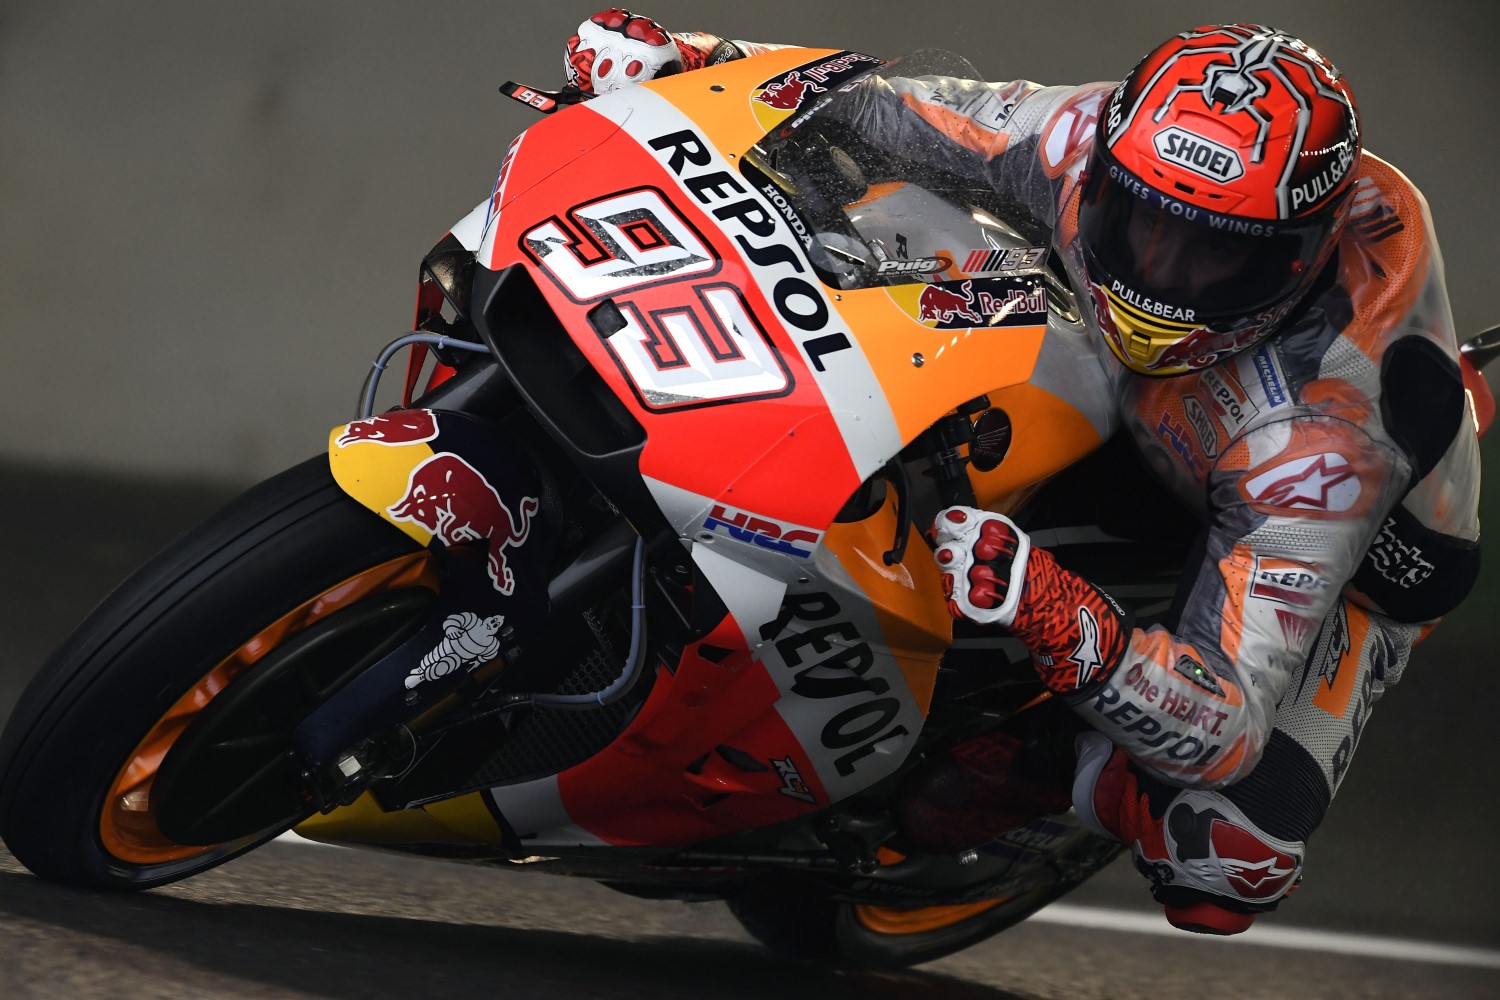 Marquez remains the favorite to take the win on Sunday